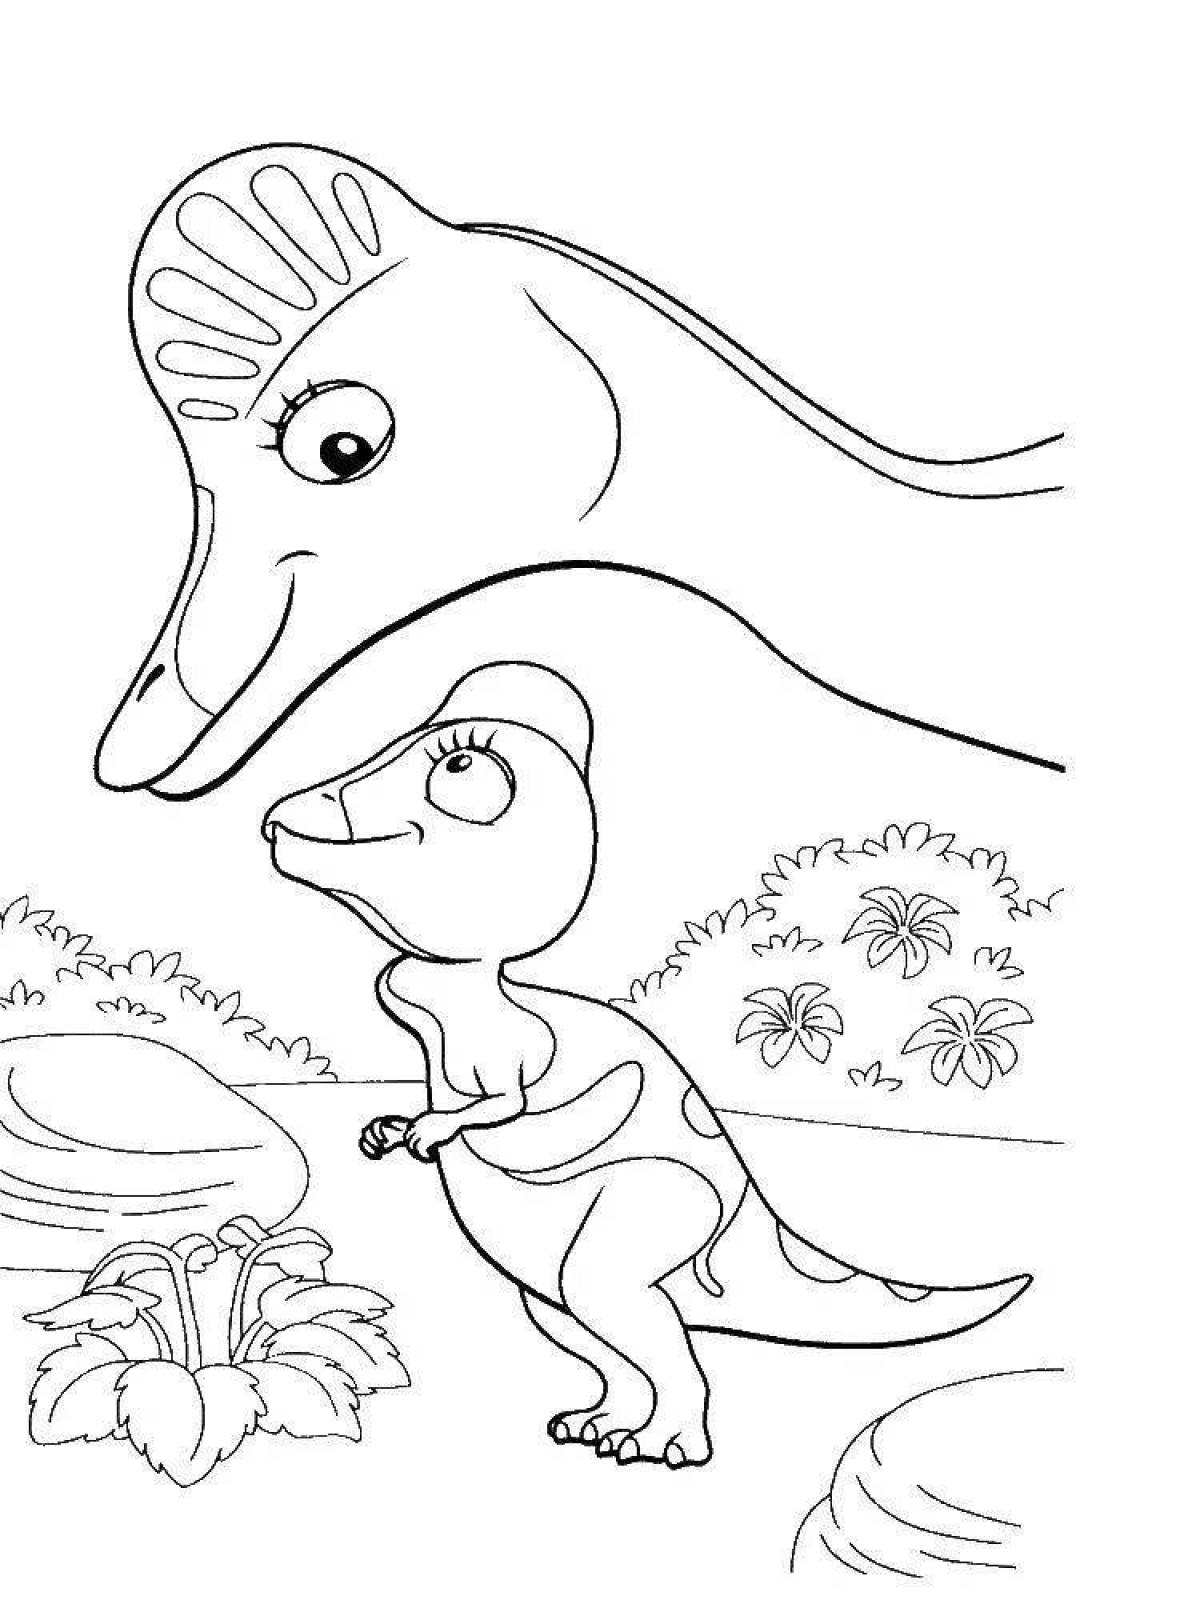 Coloring page for balanced turbosaurs